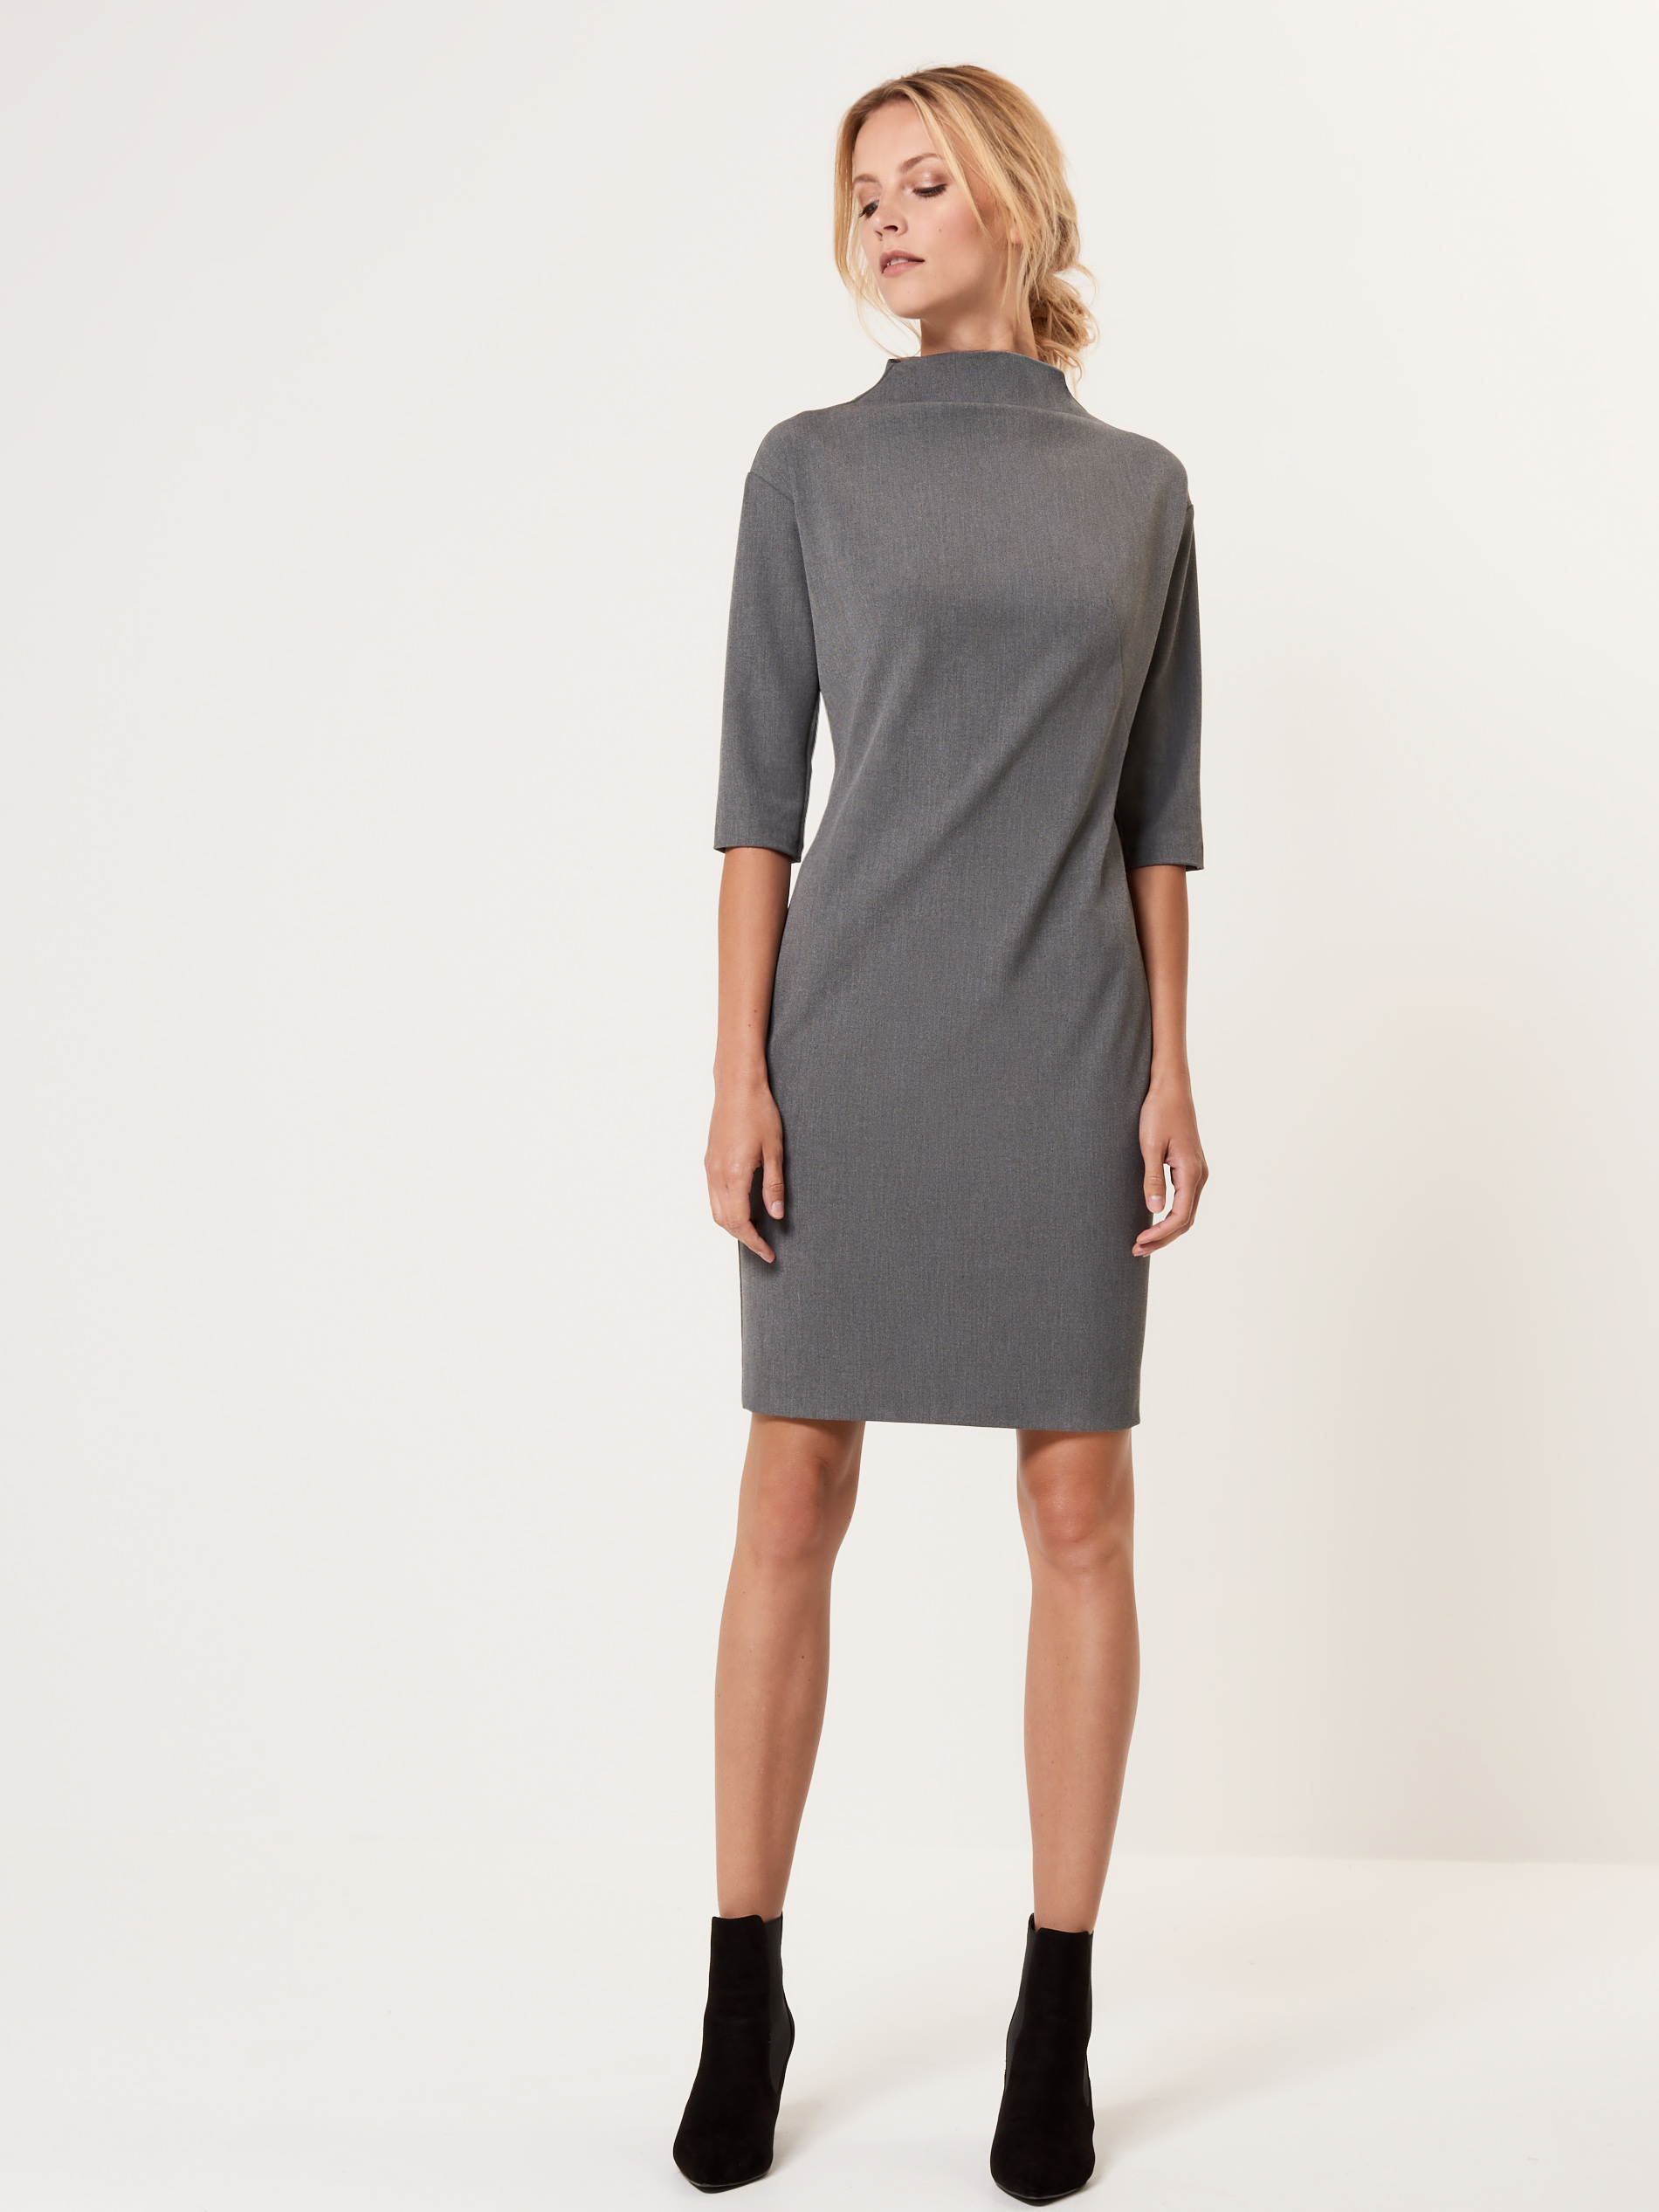 <a href=‘http://www.mohito.com/hu/hu/collection/all/dresses/sr738-90x/ladies-dress‘ target=‘_blank‘ rel=‘noopener noreferrer‘>Mohito</a></p>